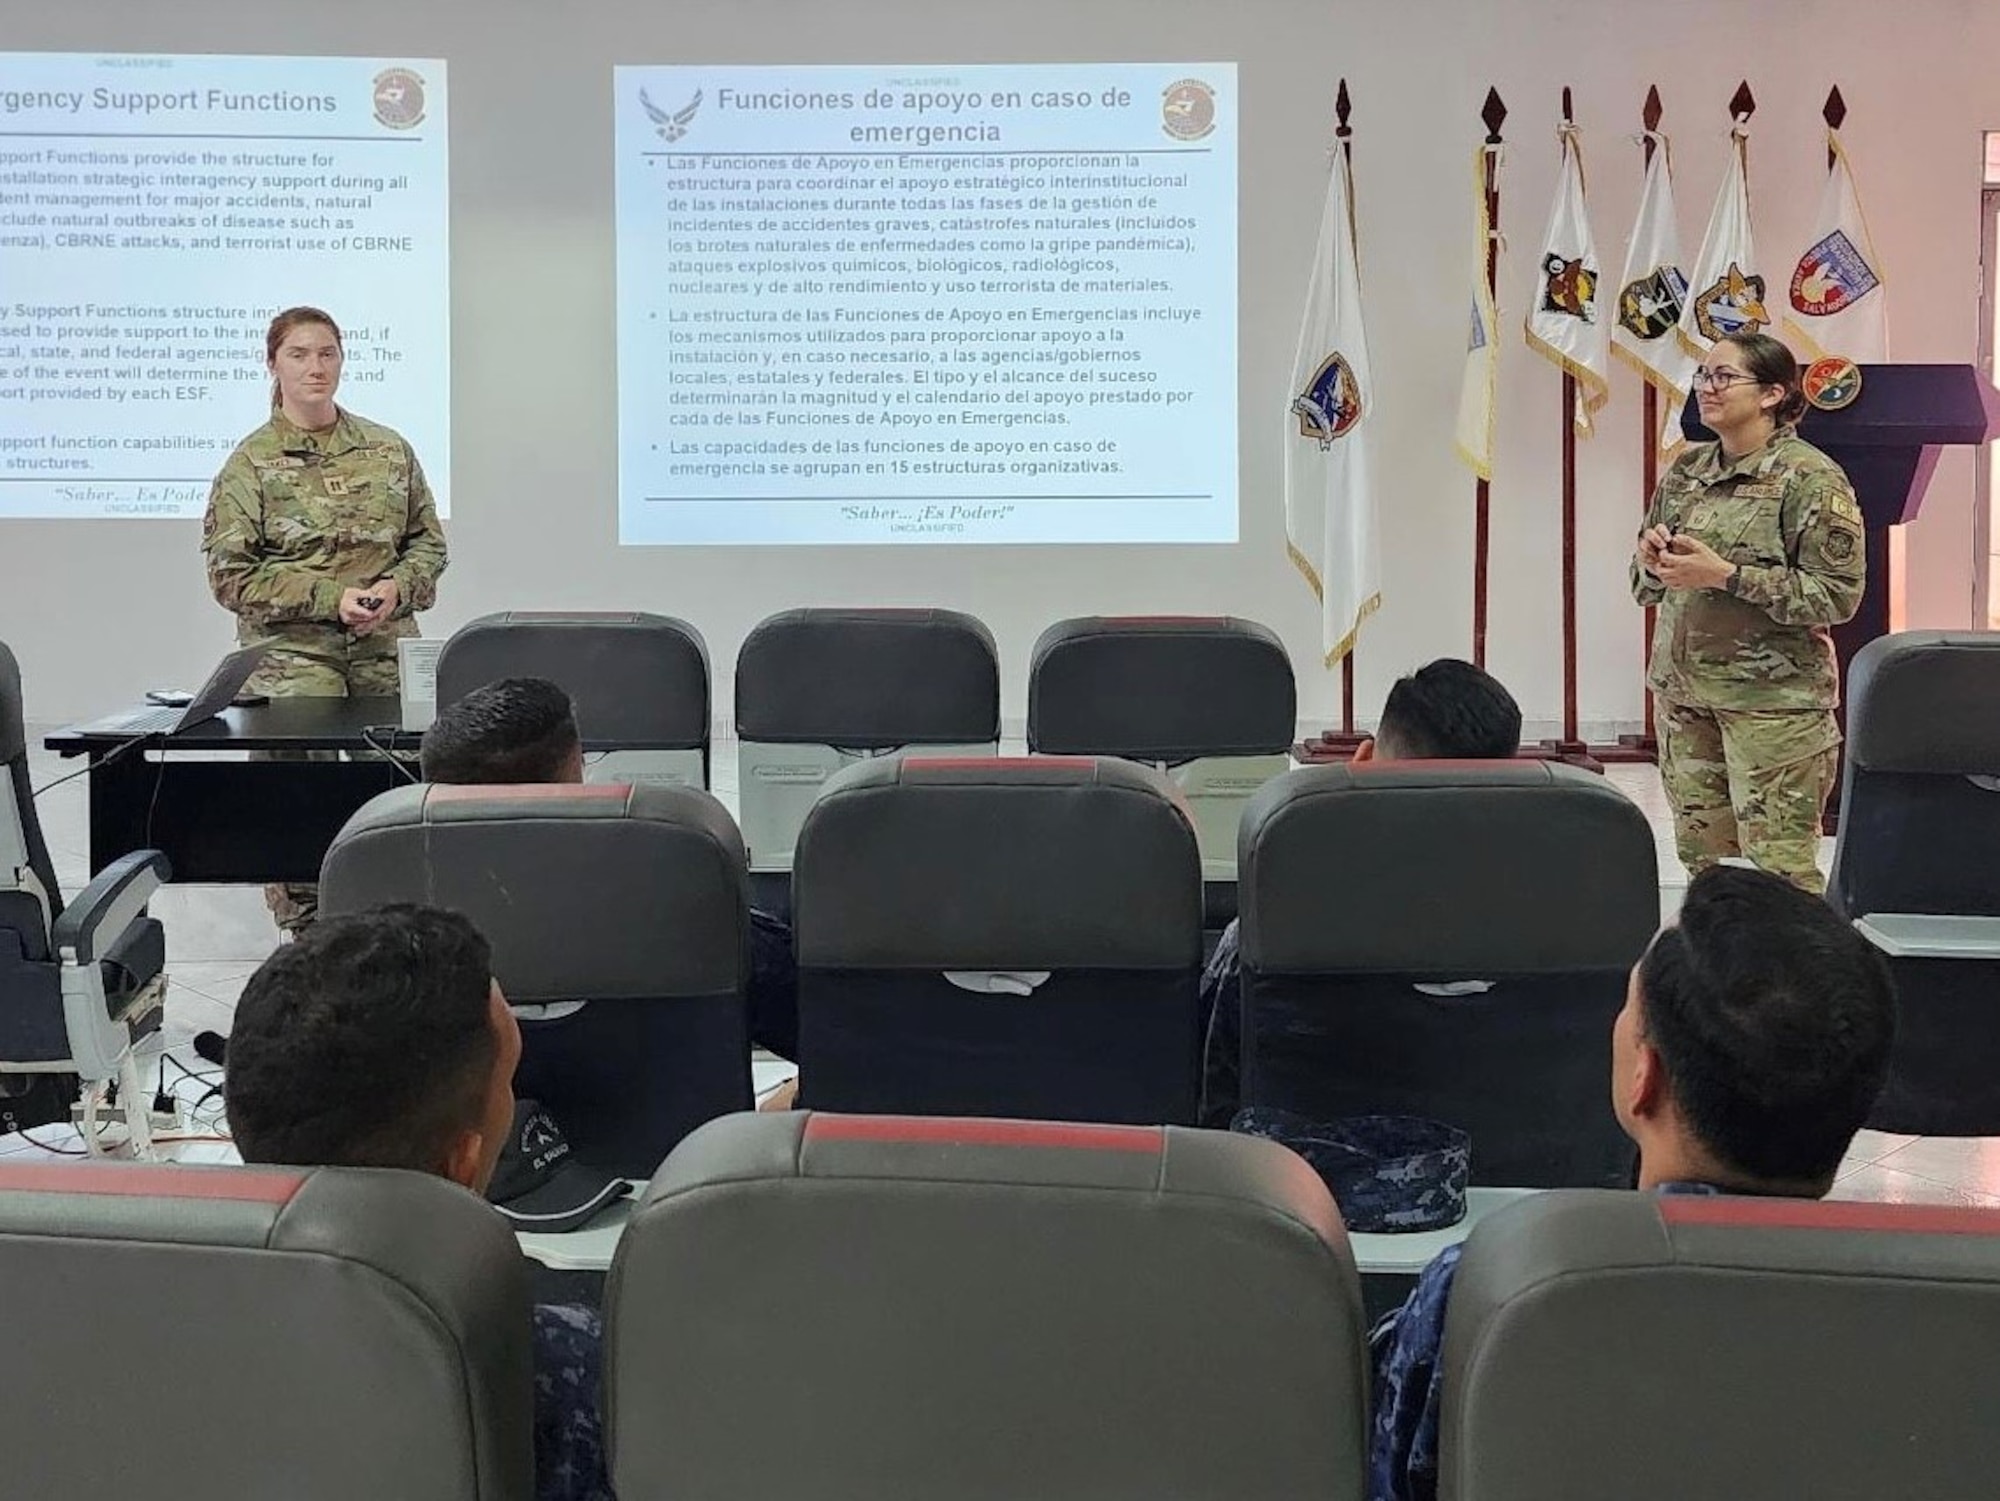 U.S. Air Force Capt. Kiara Vance and Master Sgt. Ana Mendiola, 571 Mobility Support Advisory Squadron air advisors stationed at Travis Air Force Base, Californiia, brief on Emergency Management concepts to members of the Fuerza Aérea Salvadoreña (FAS) during El Salvador Mobile Training Team 23-22, Aug. 28, 2023, Ilopango International Airport, San Salvador.